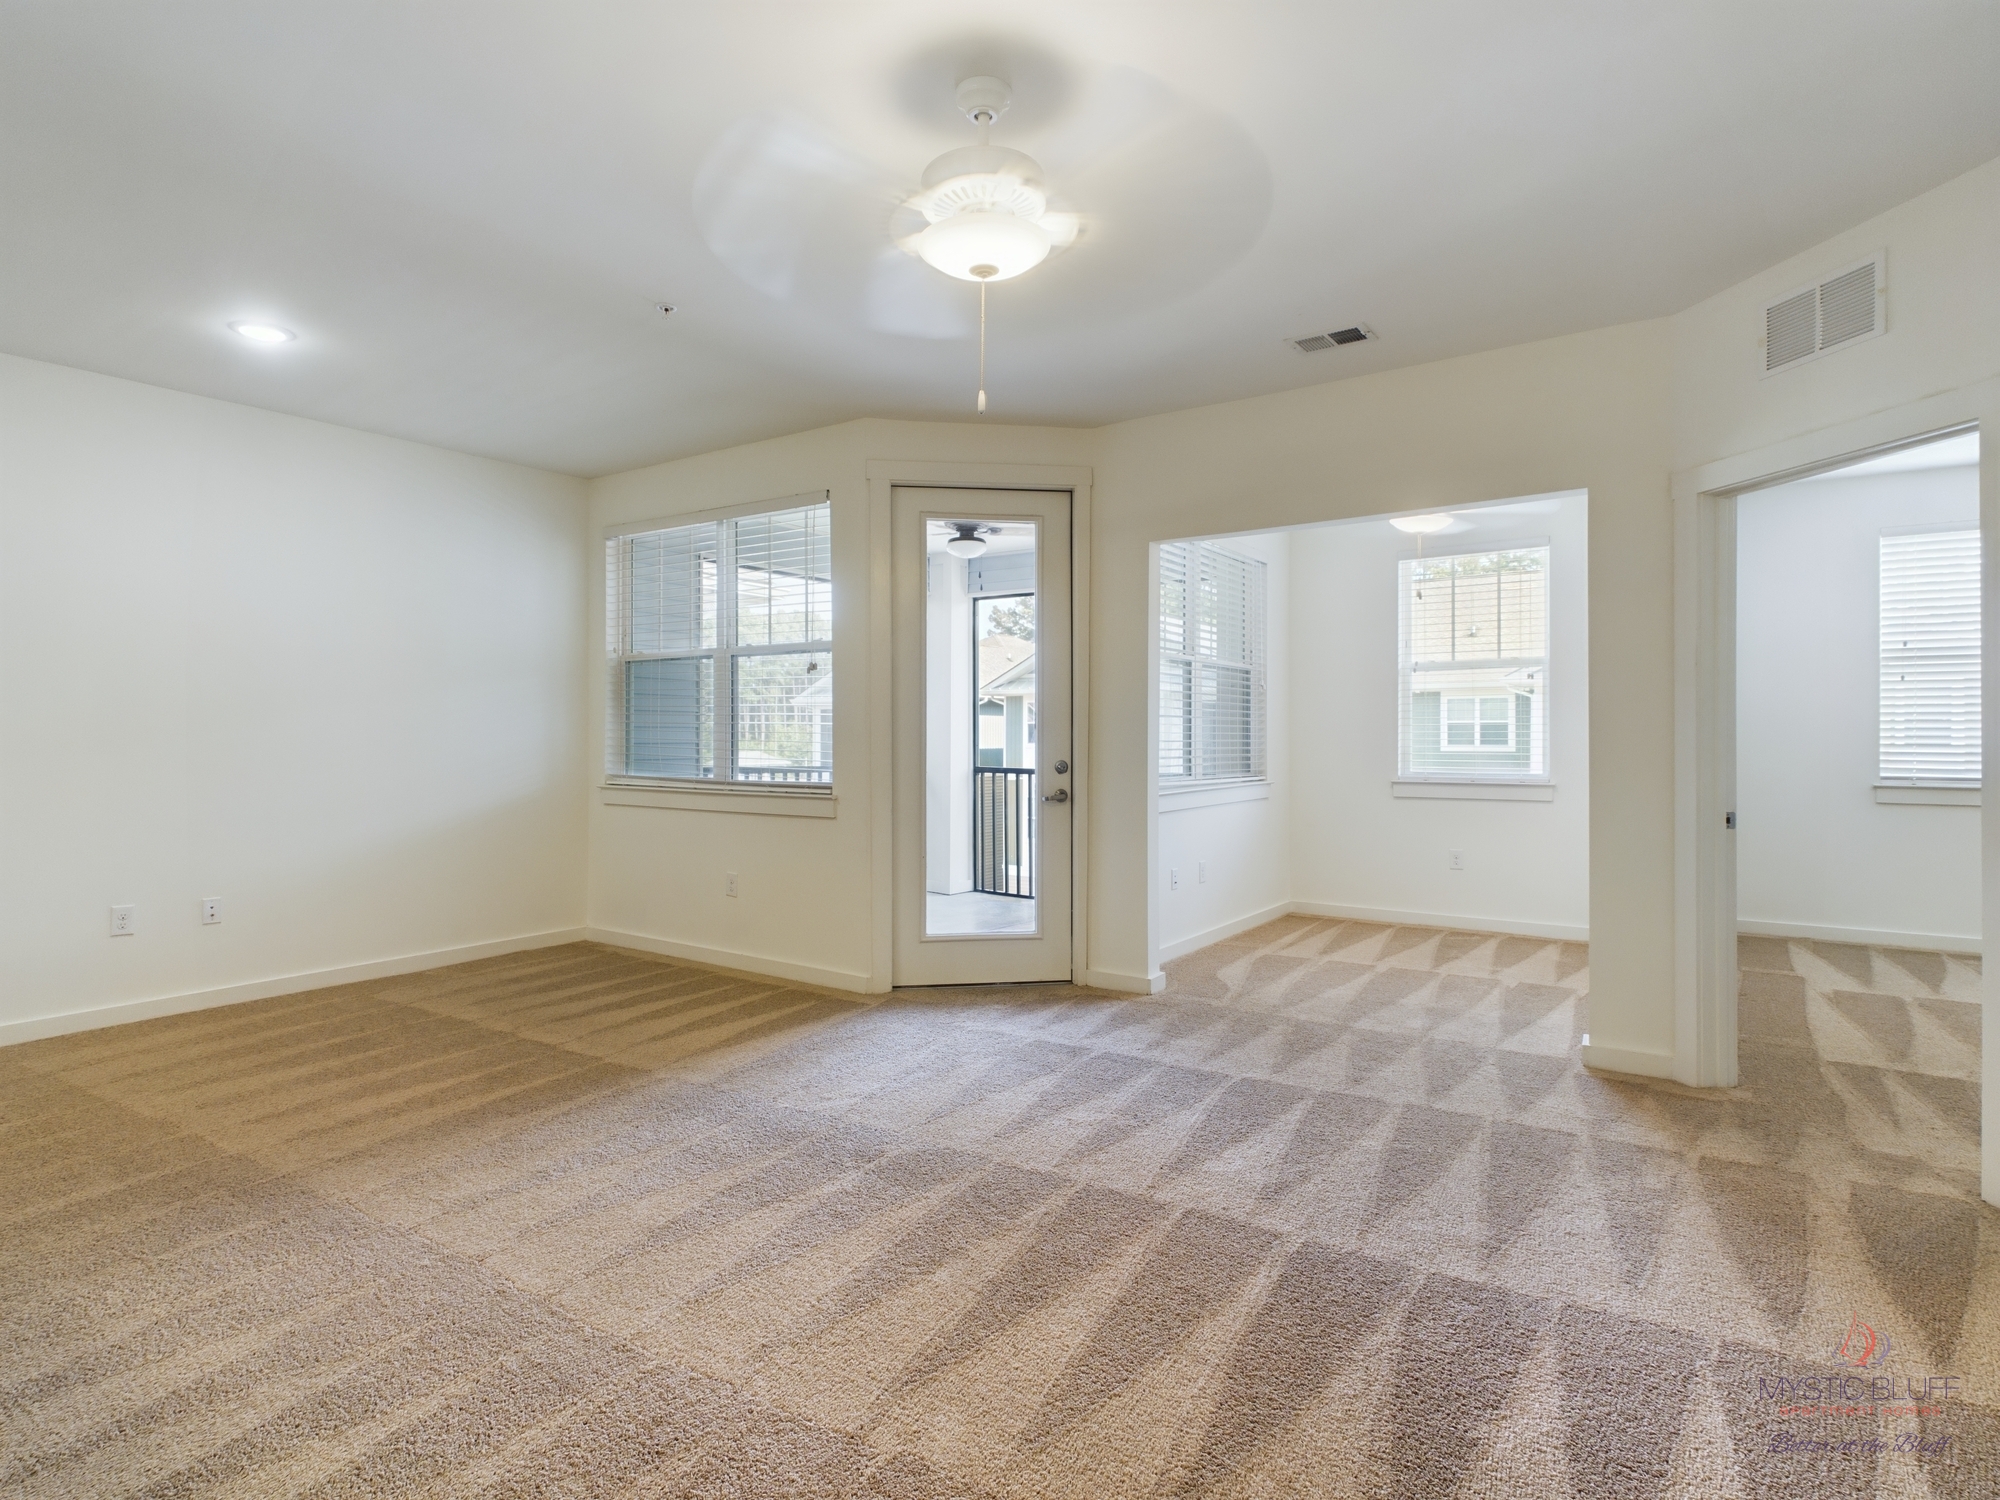 Empty living room with beige carpet and ceiling fan in apartments.